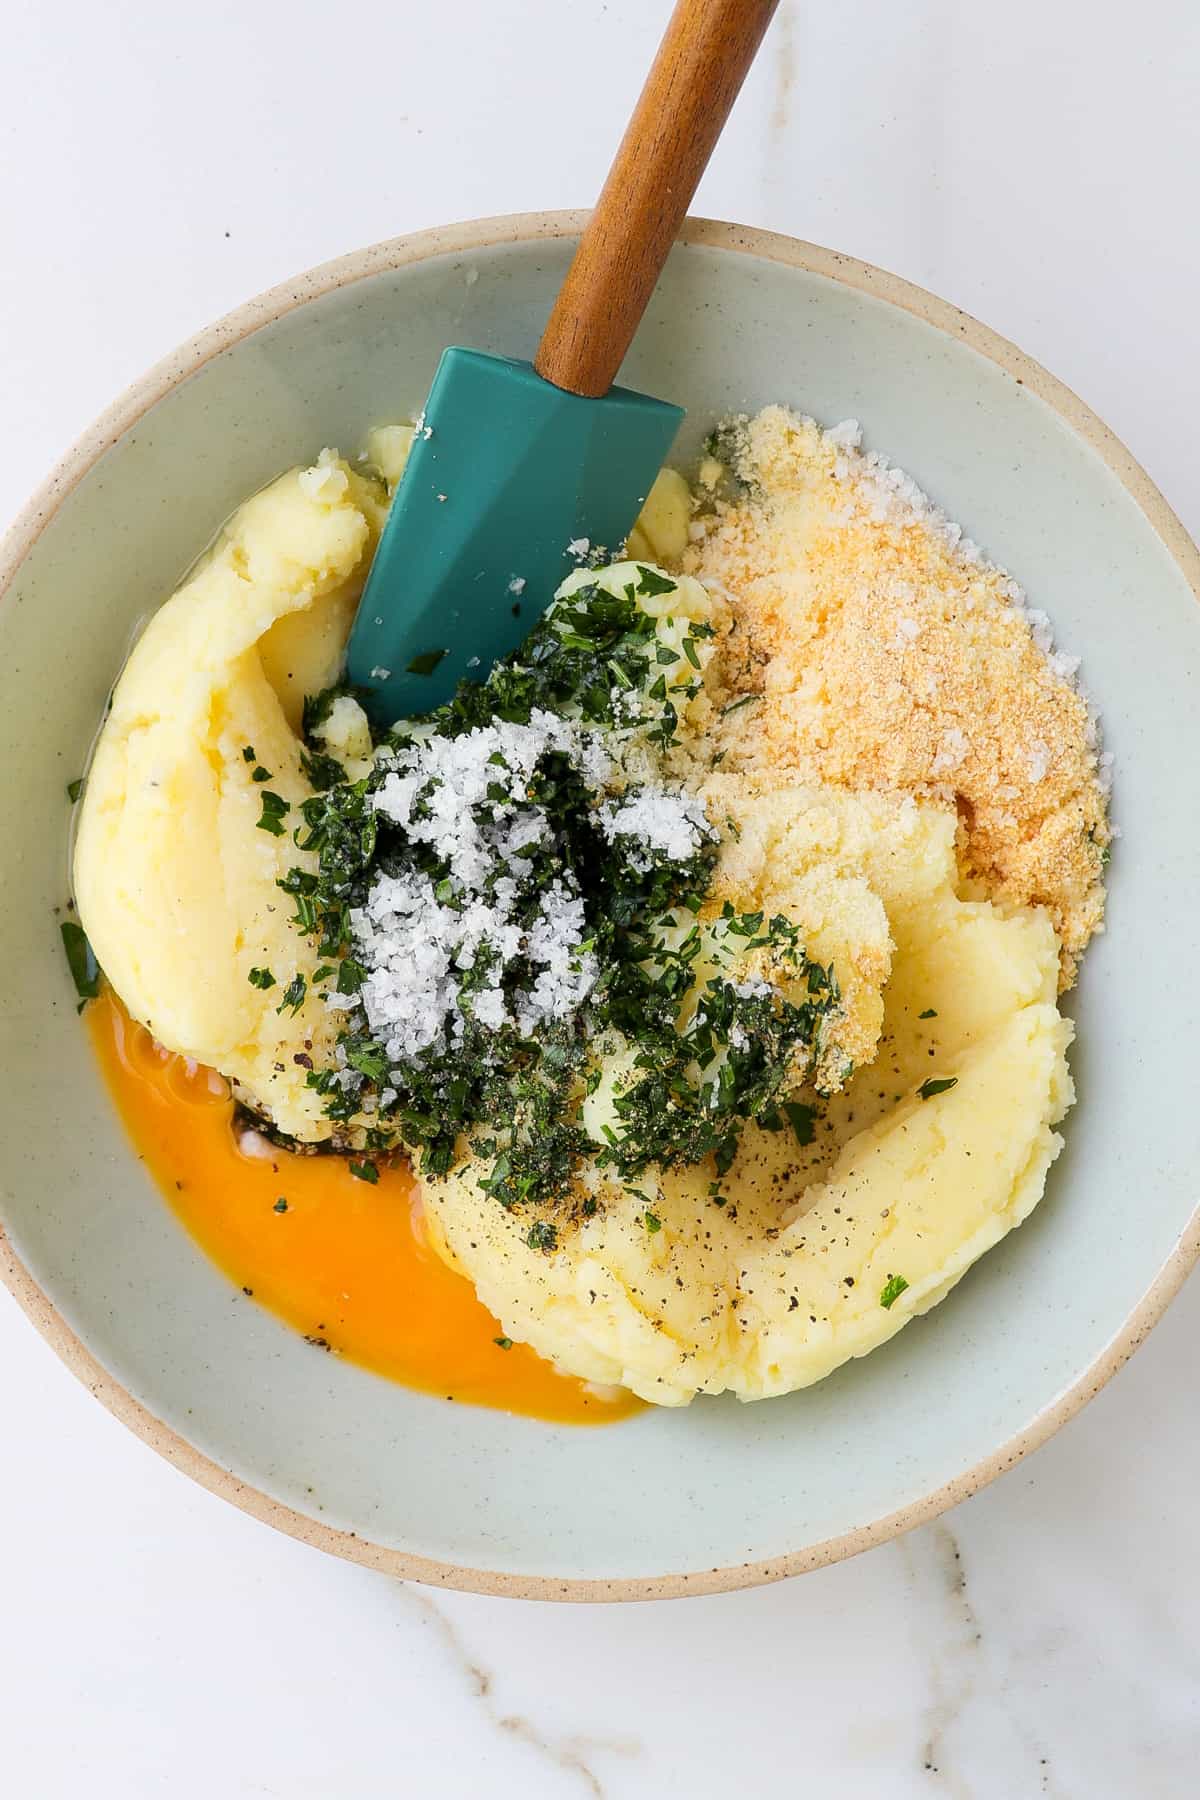 Mashed potatoes, egg, herbs and seasoning in a bowl with a spatula.